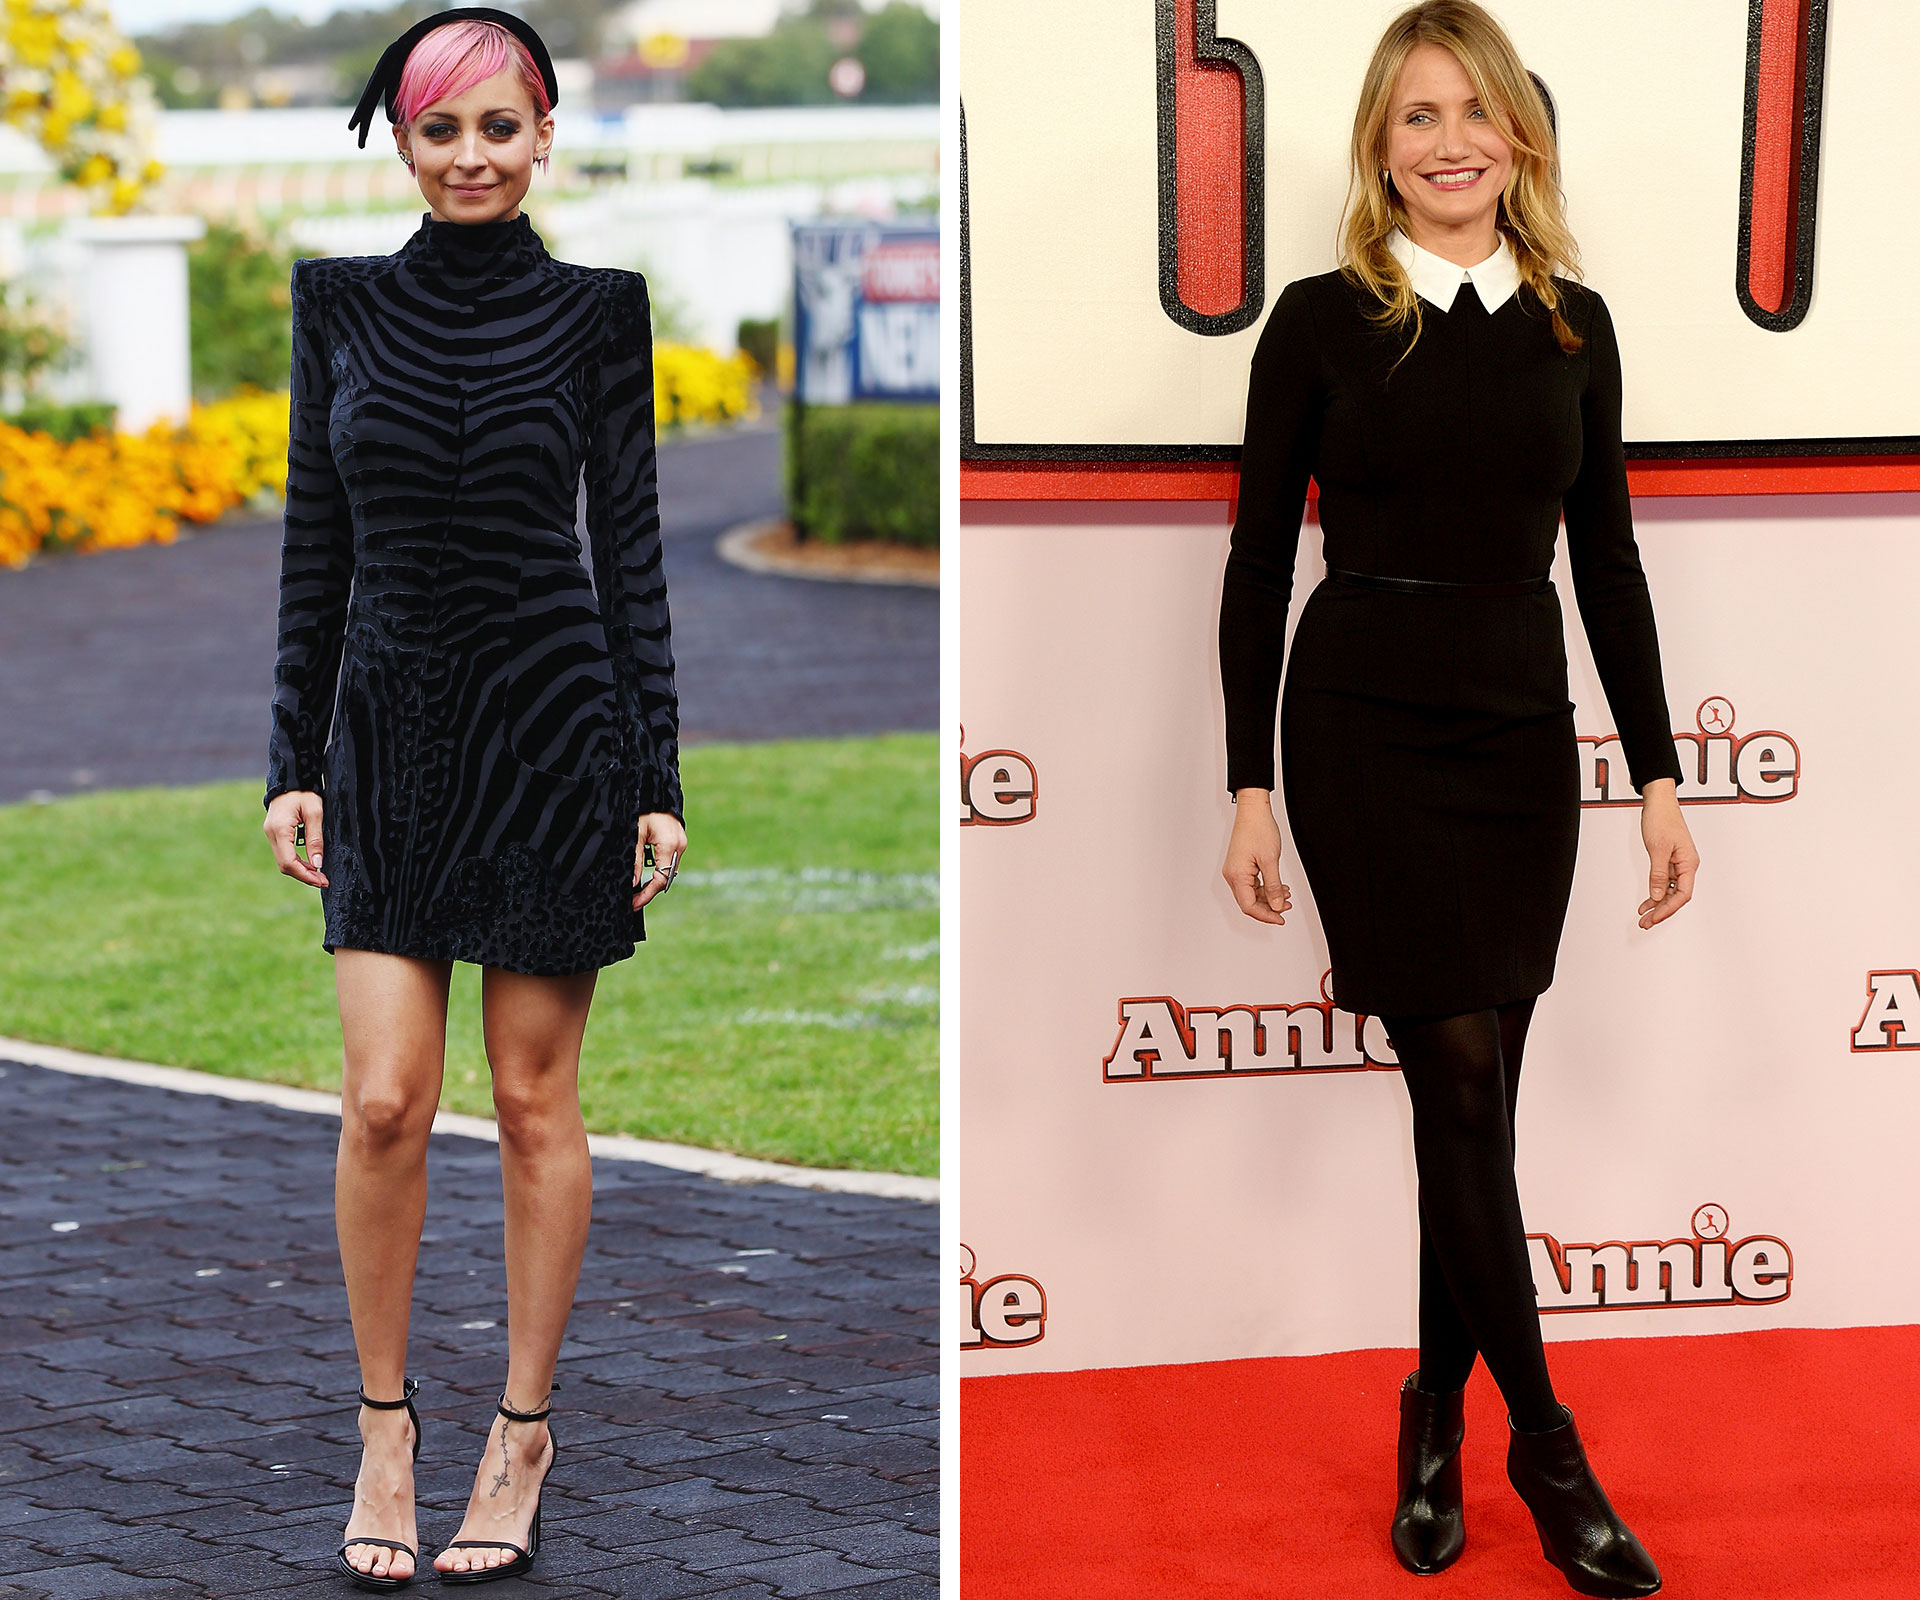 Sisters-in-law Nicole Richie and Cameron Diaz become neighbours!